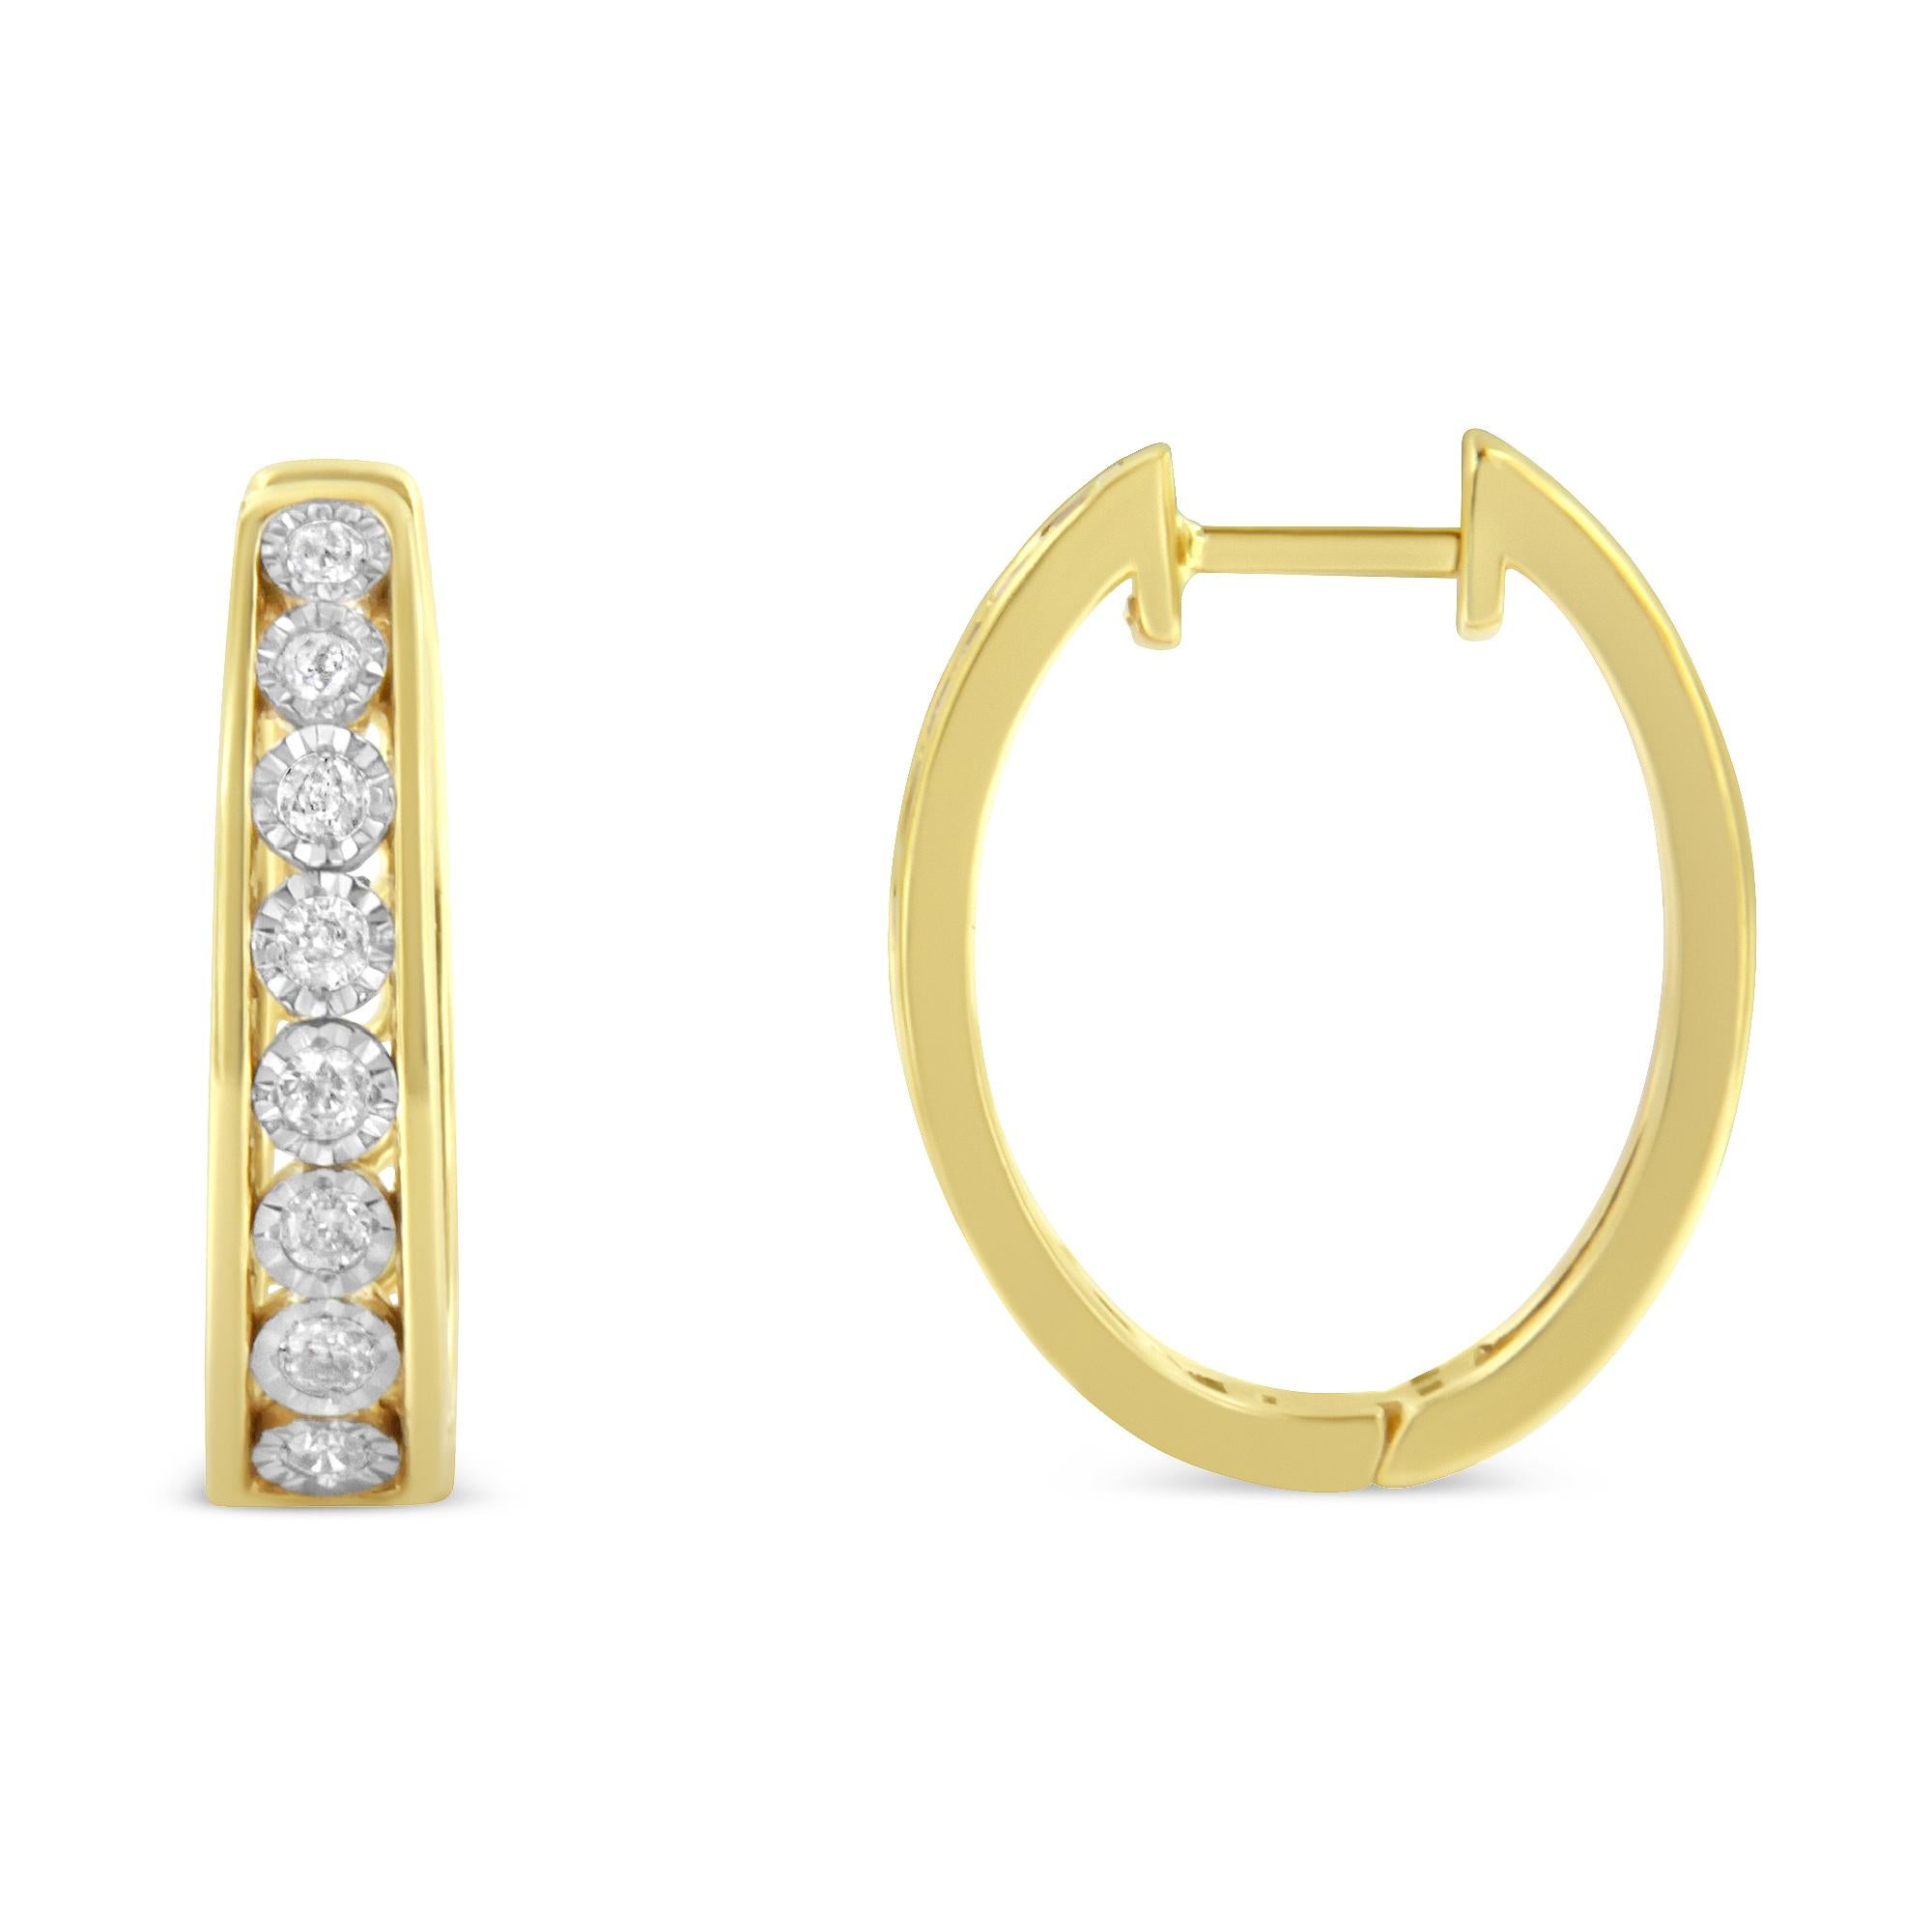 Brilliant diamonds set in 10 karat two-tone gold add sparkle to this pair of elegant hoop earrings. Each earring features eight round diamonds set in a miracle setting. The total diamond weight is .49 carats. They are built with leverback closures.